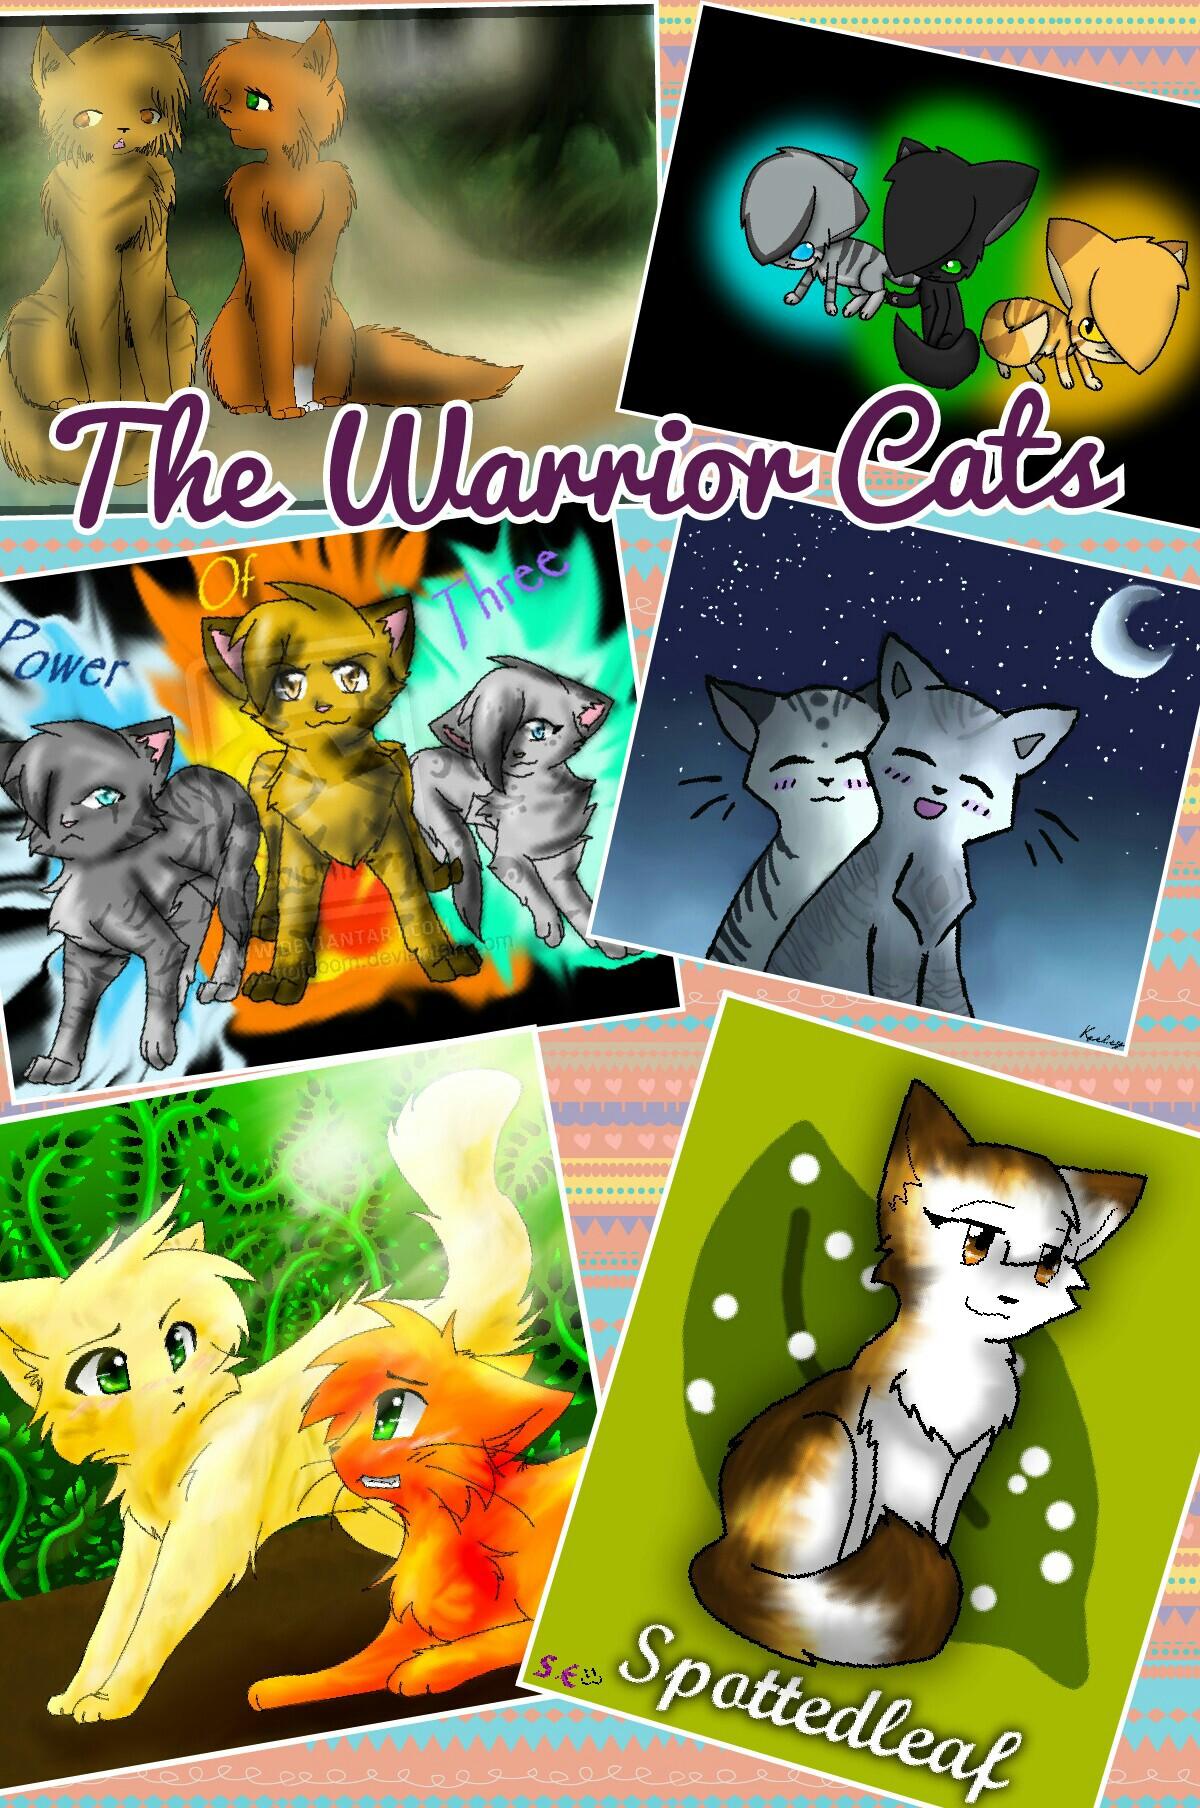 The Warrior Cats r Awesome!